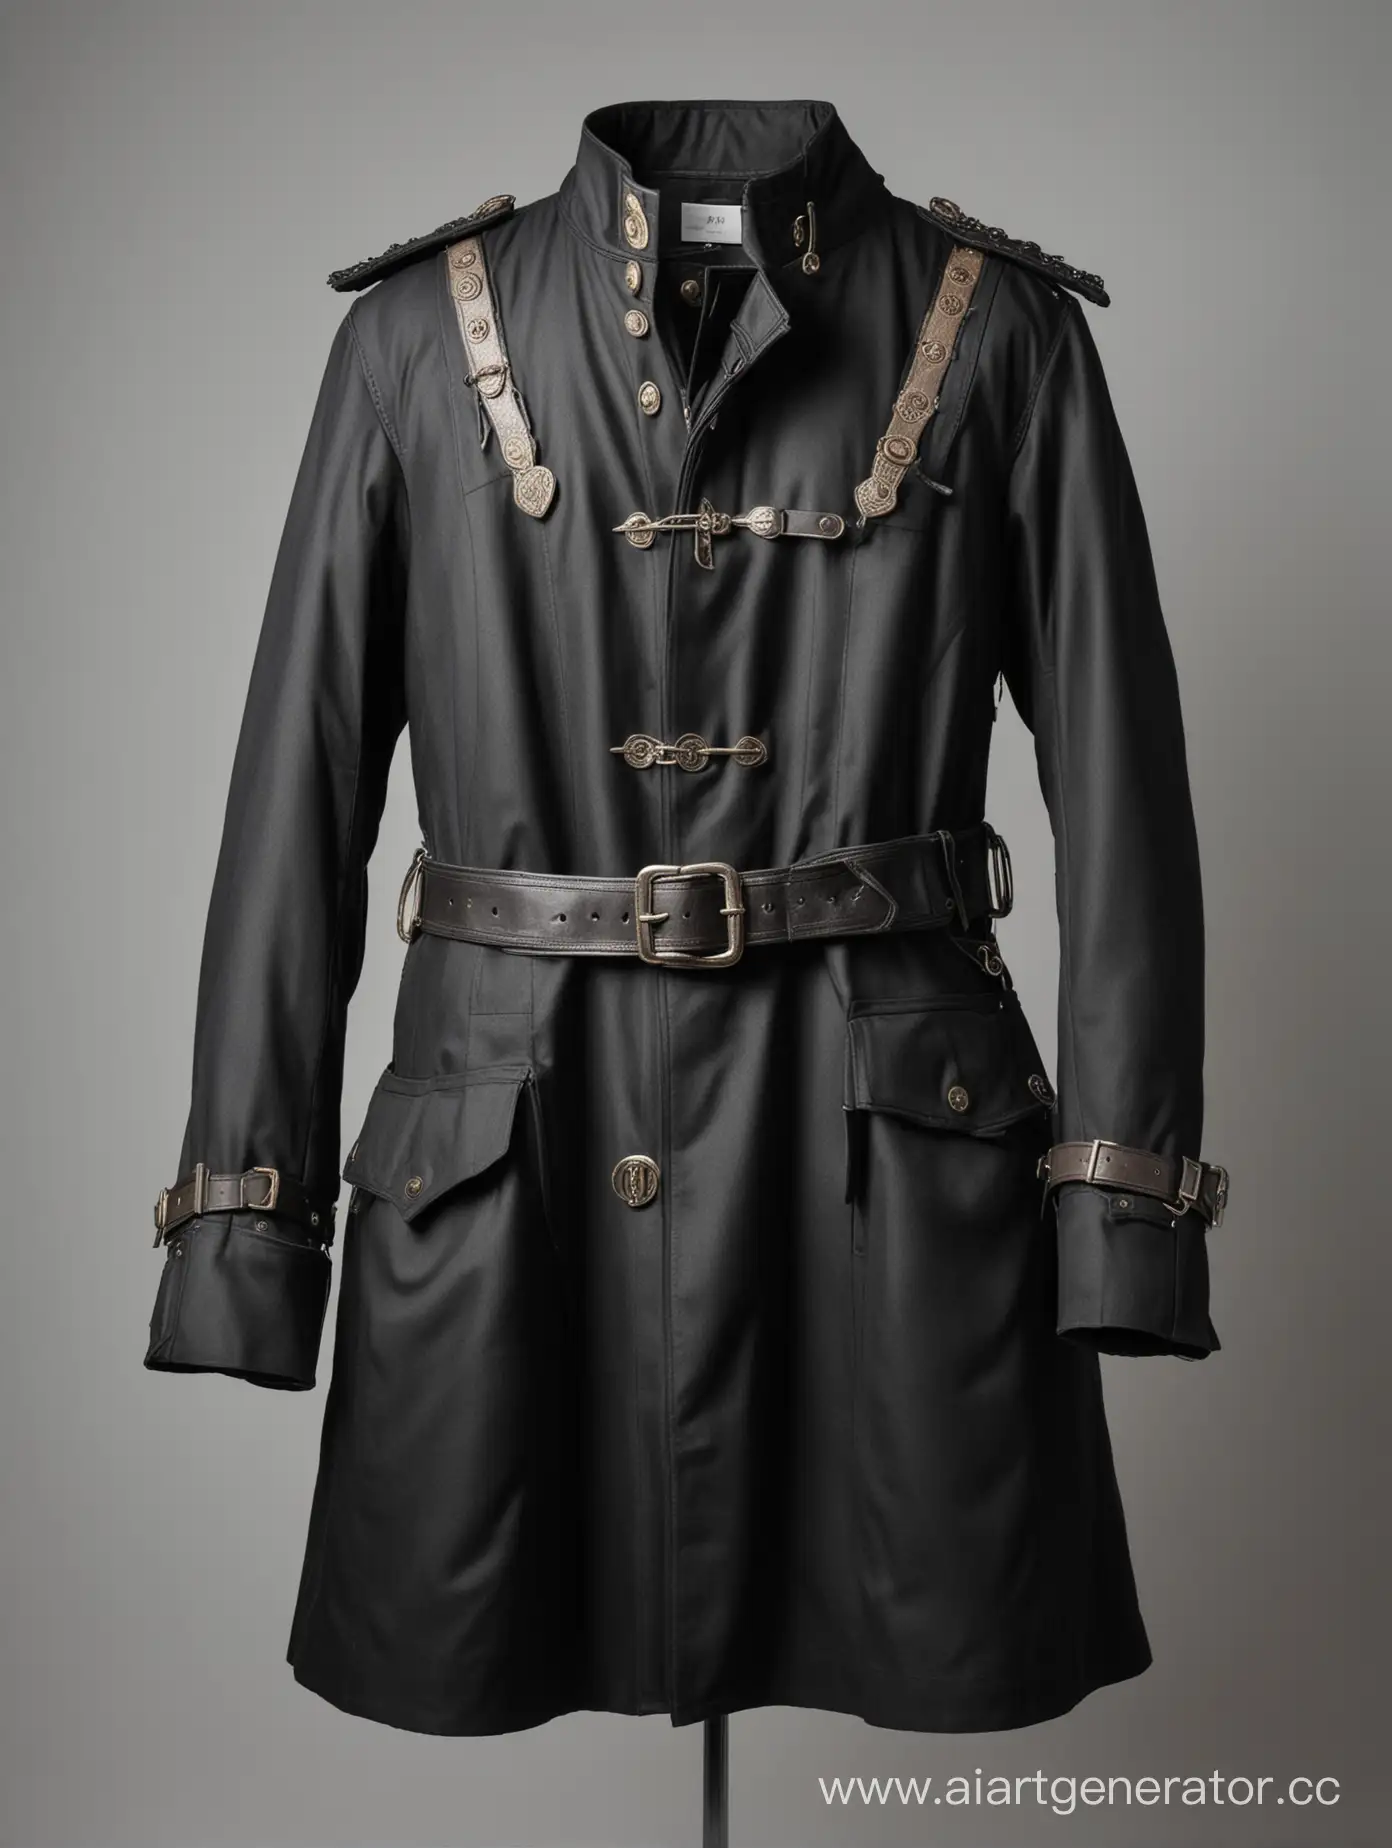 Medieval-Detective-Style-Black-Coat-with-Multiple-Pockets-on-White-Background